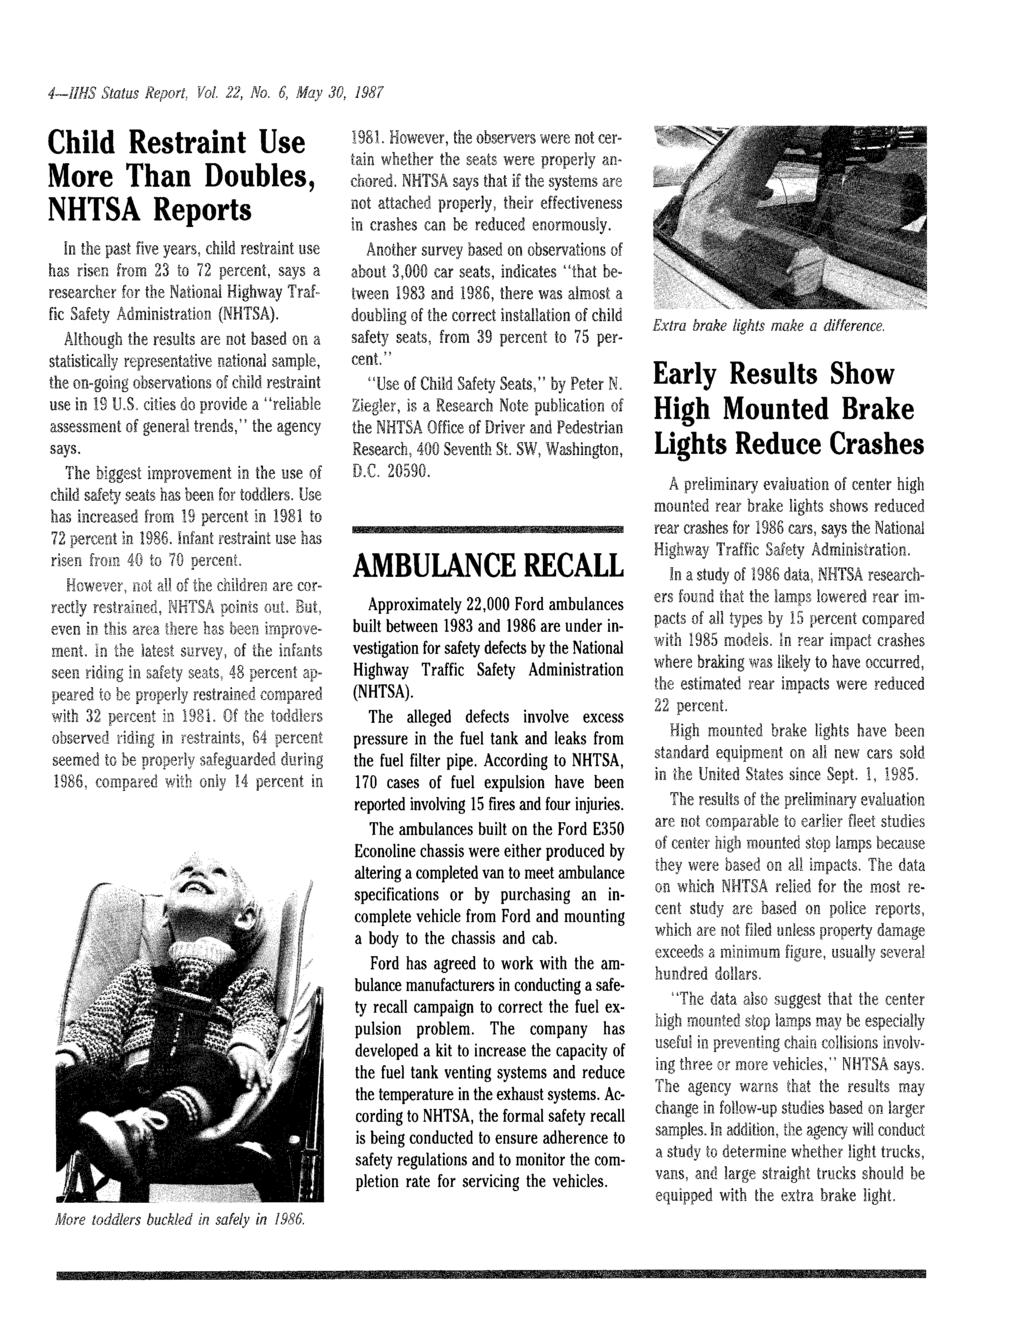 Child Restraint Use More Than Doubles, NHTSA Reports Early Results Show High Mounted Brake Lights Reduce Crashes AMBULANCE RECALL Approximately 22,000 Ford ambulances built between 1983 and 1986 are